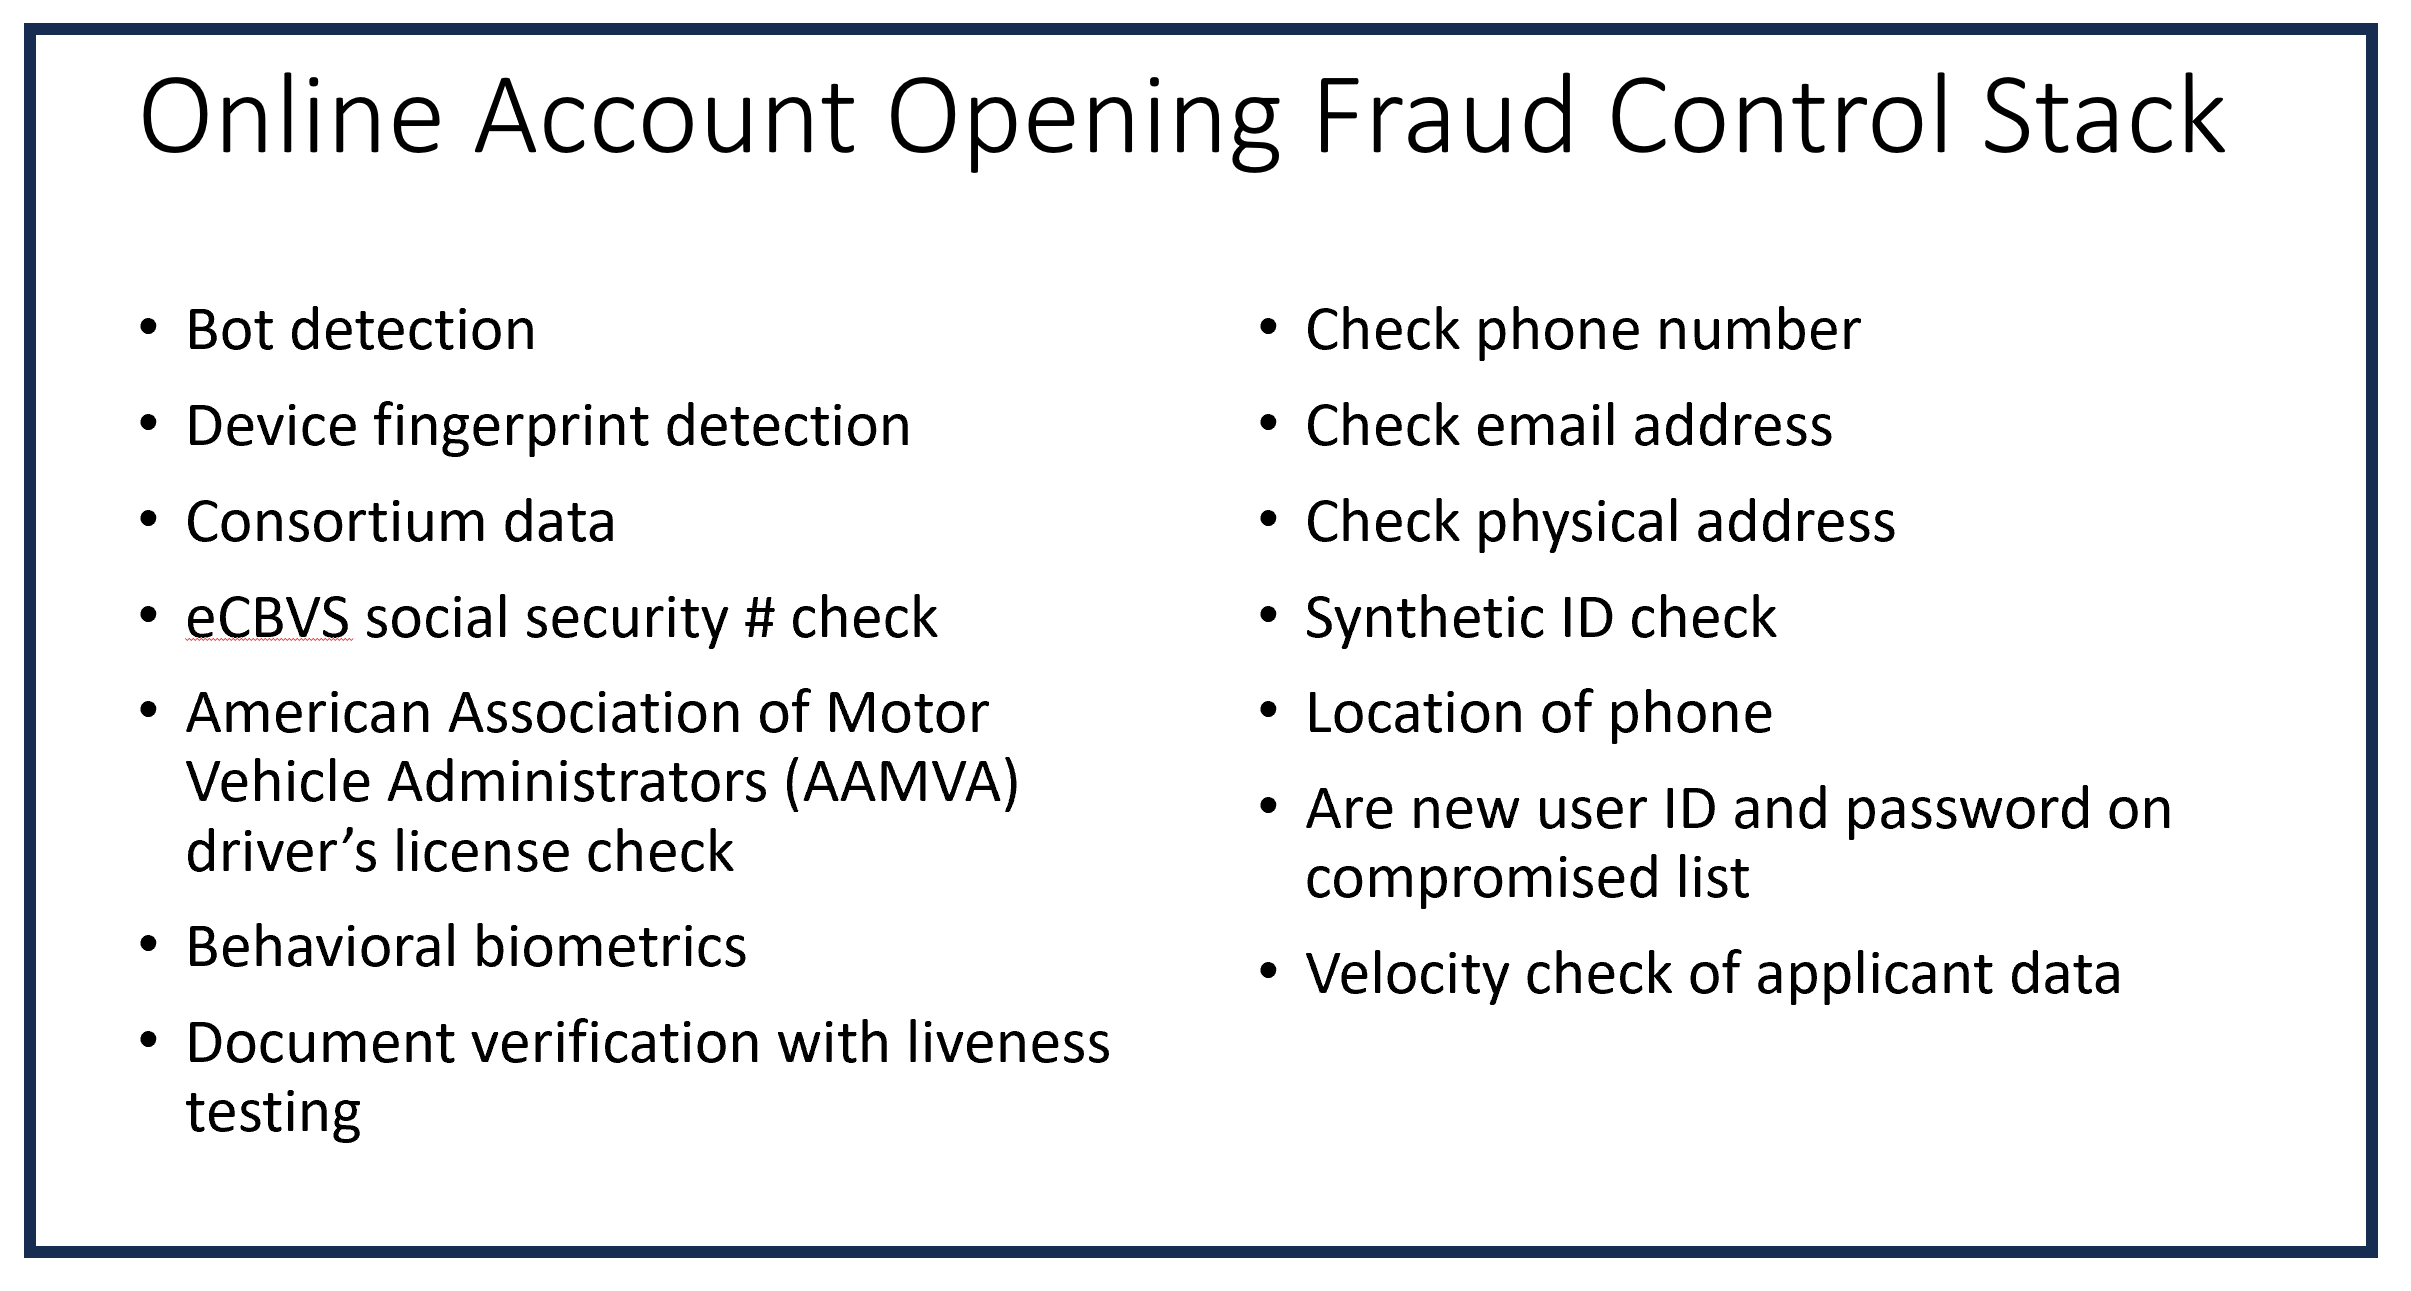 Online account opening fraud control stack